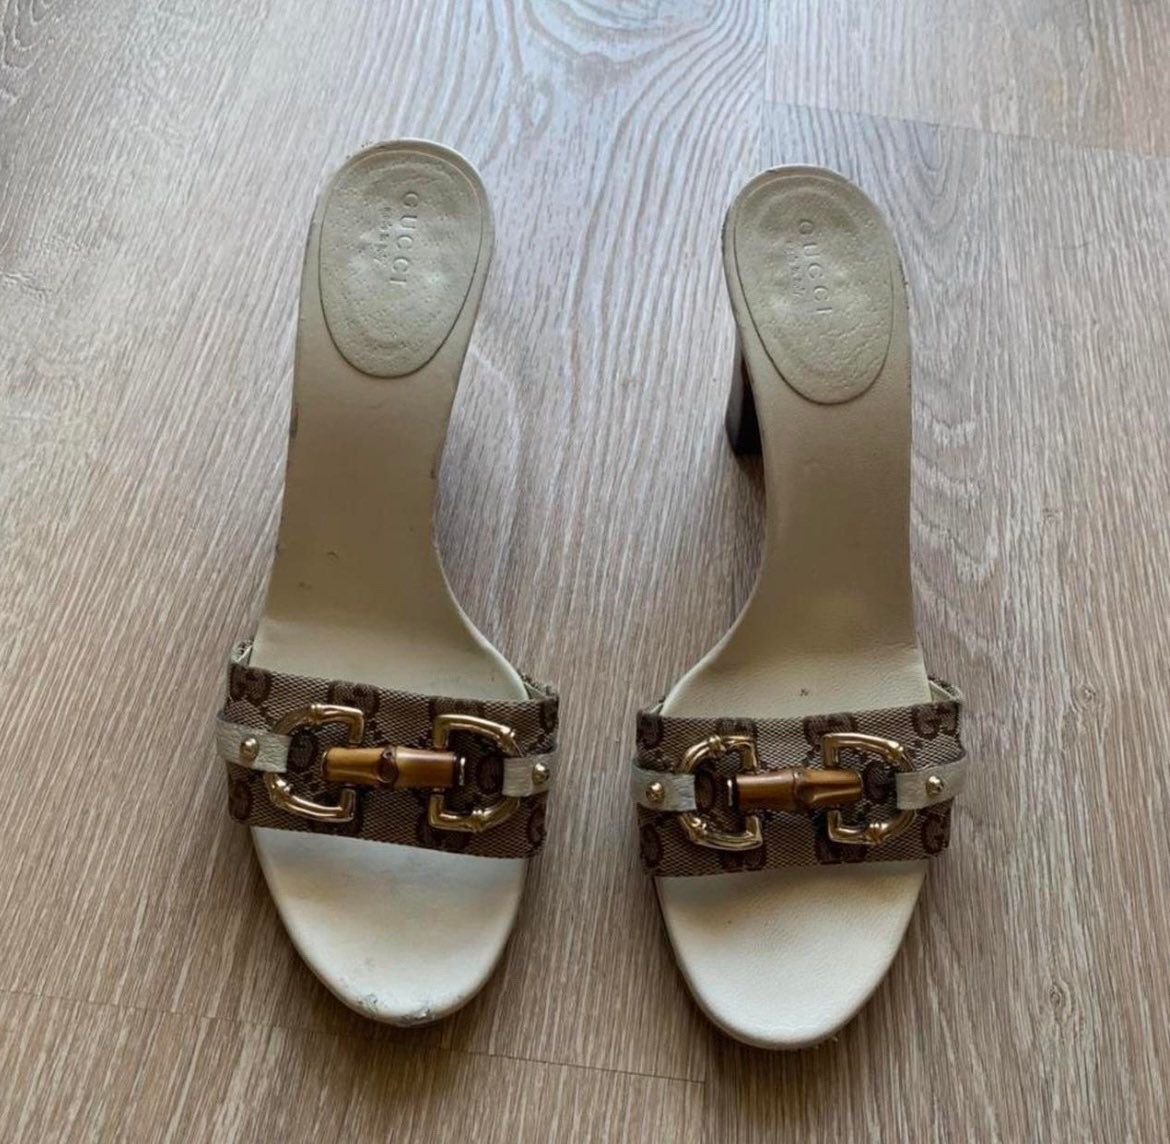 60+ Gucci Inspired Shoes: Loafers, Mules, Sandals and More!